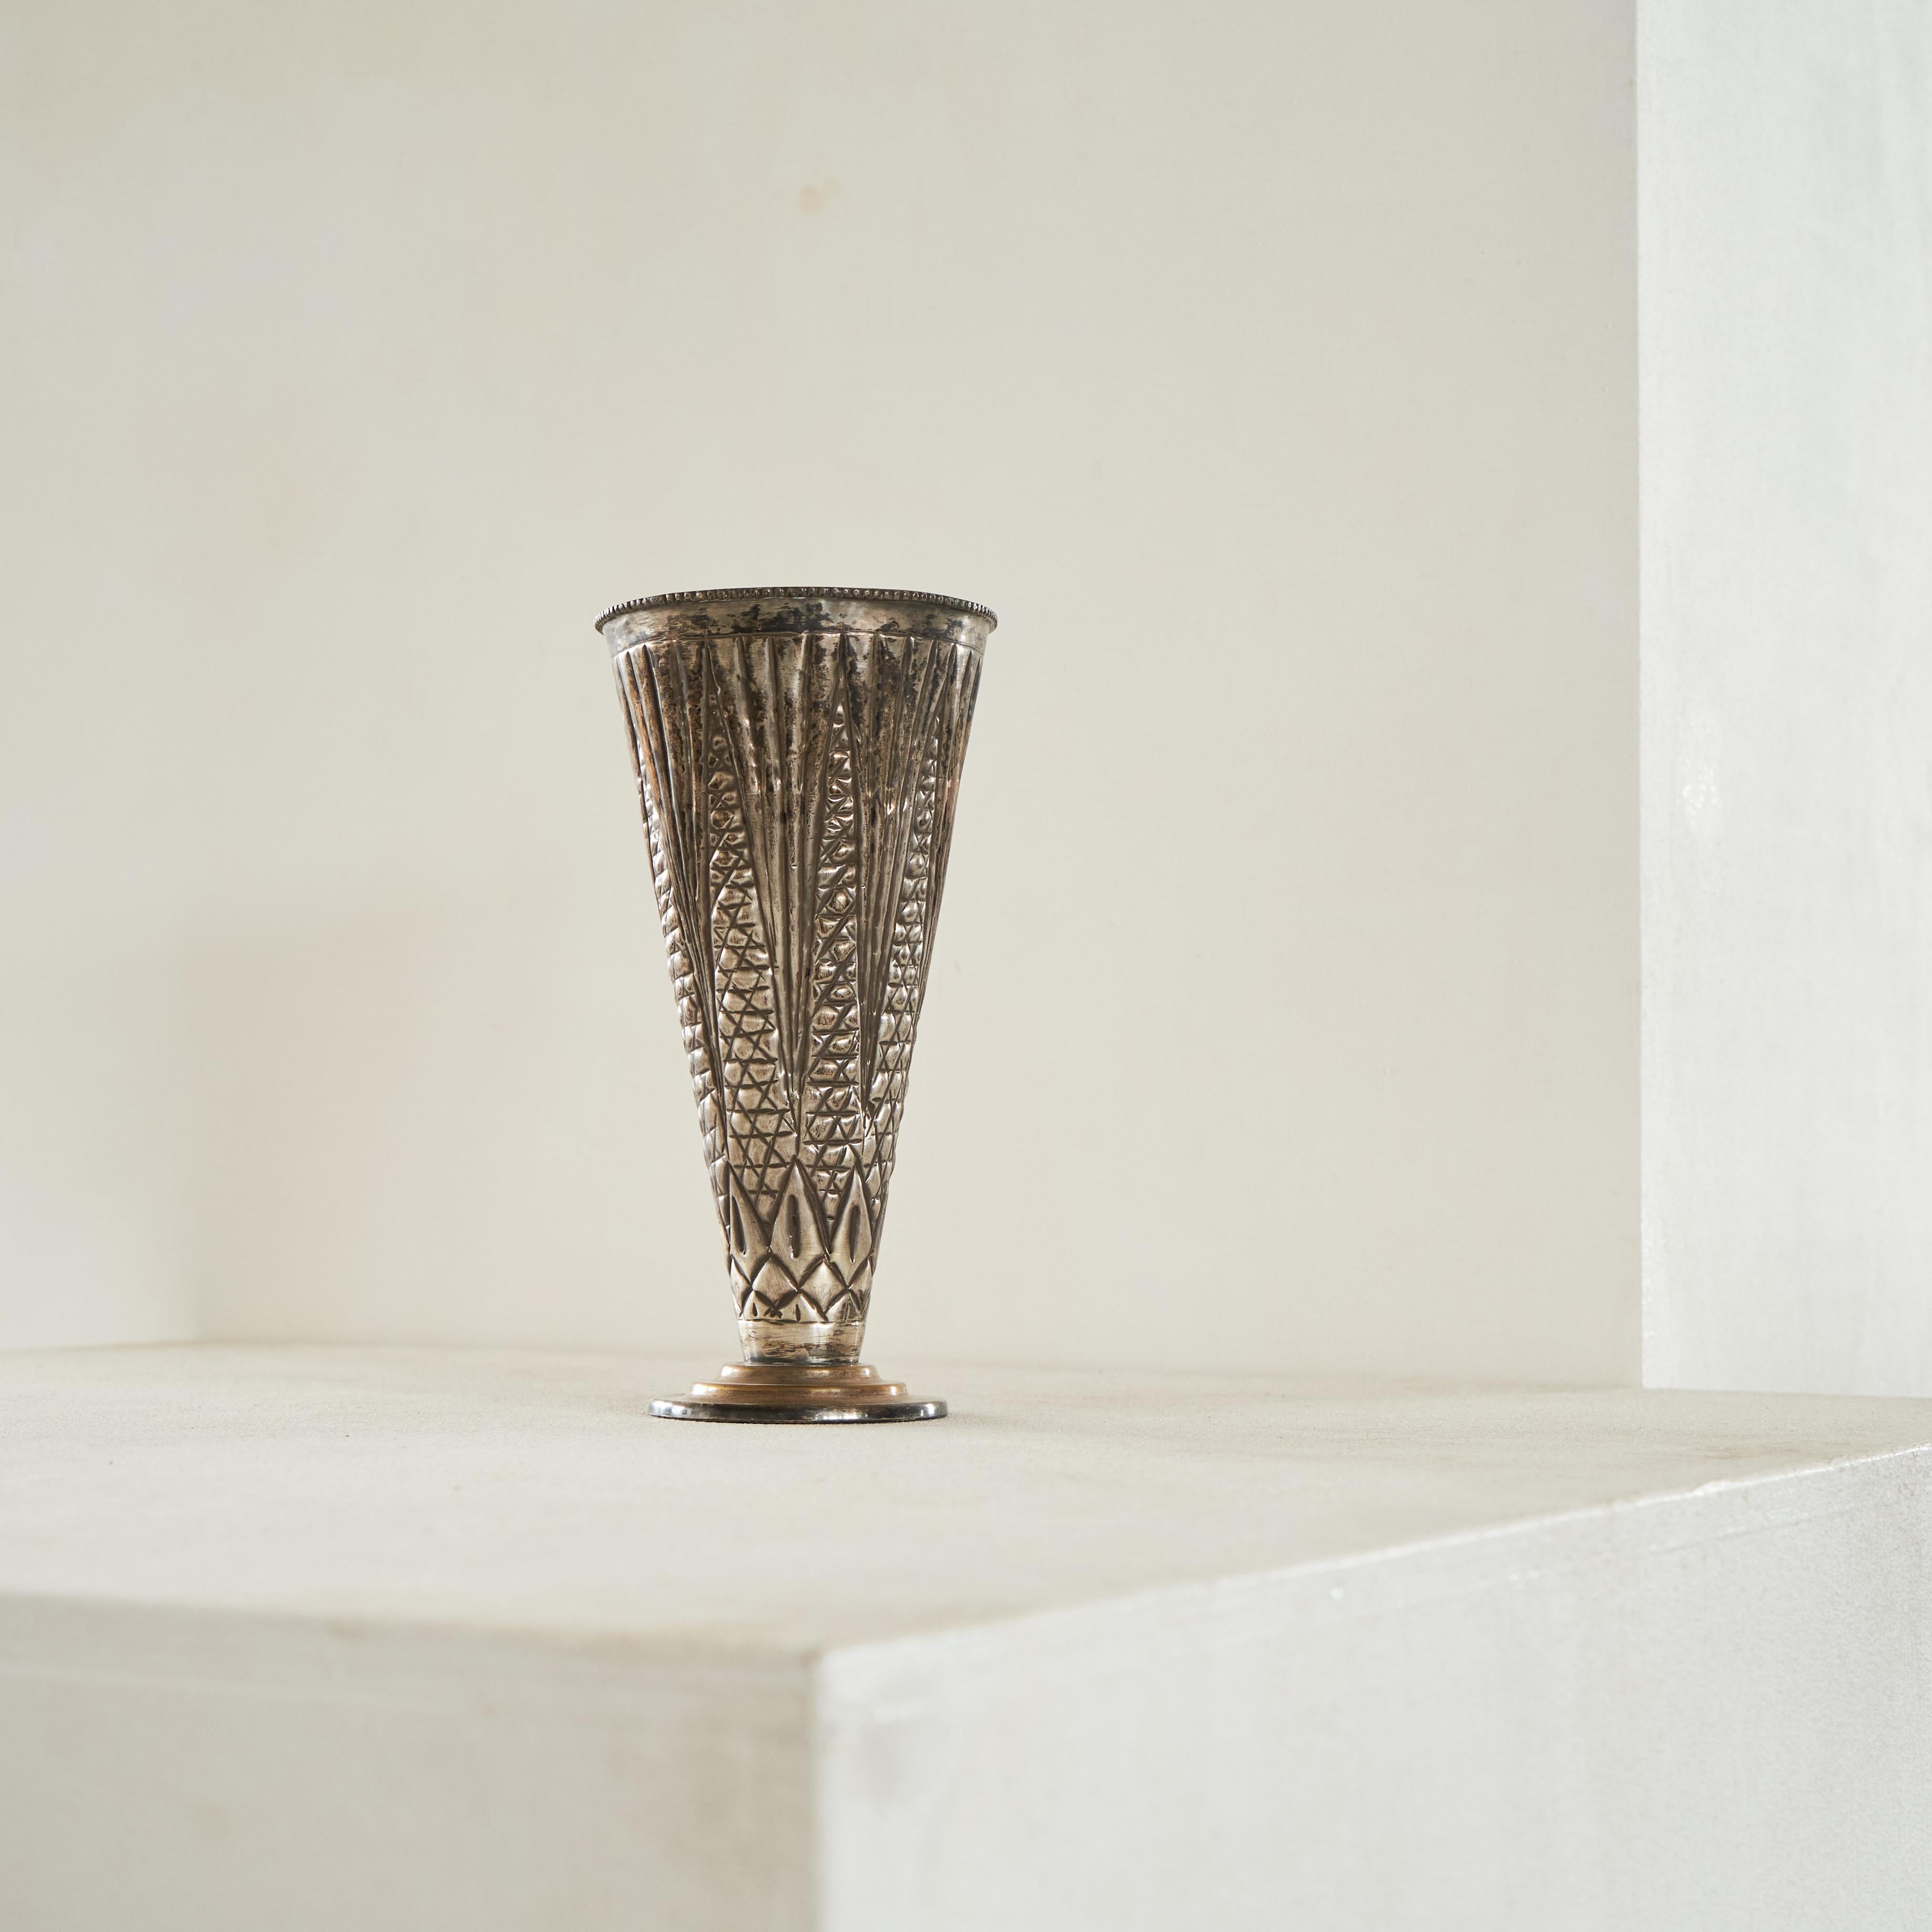 Hand Made Art Deco Vase in Patinated Silver Plate, 1930s.

Beautiful slender and stylish art deco vase in silver plated metal. Hand made and hand hammered, this vase shows great eye for detail and very elegant proportions. Great as a stand alone